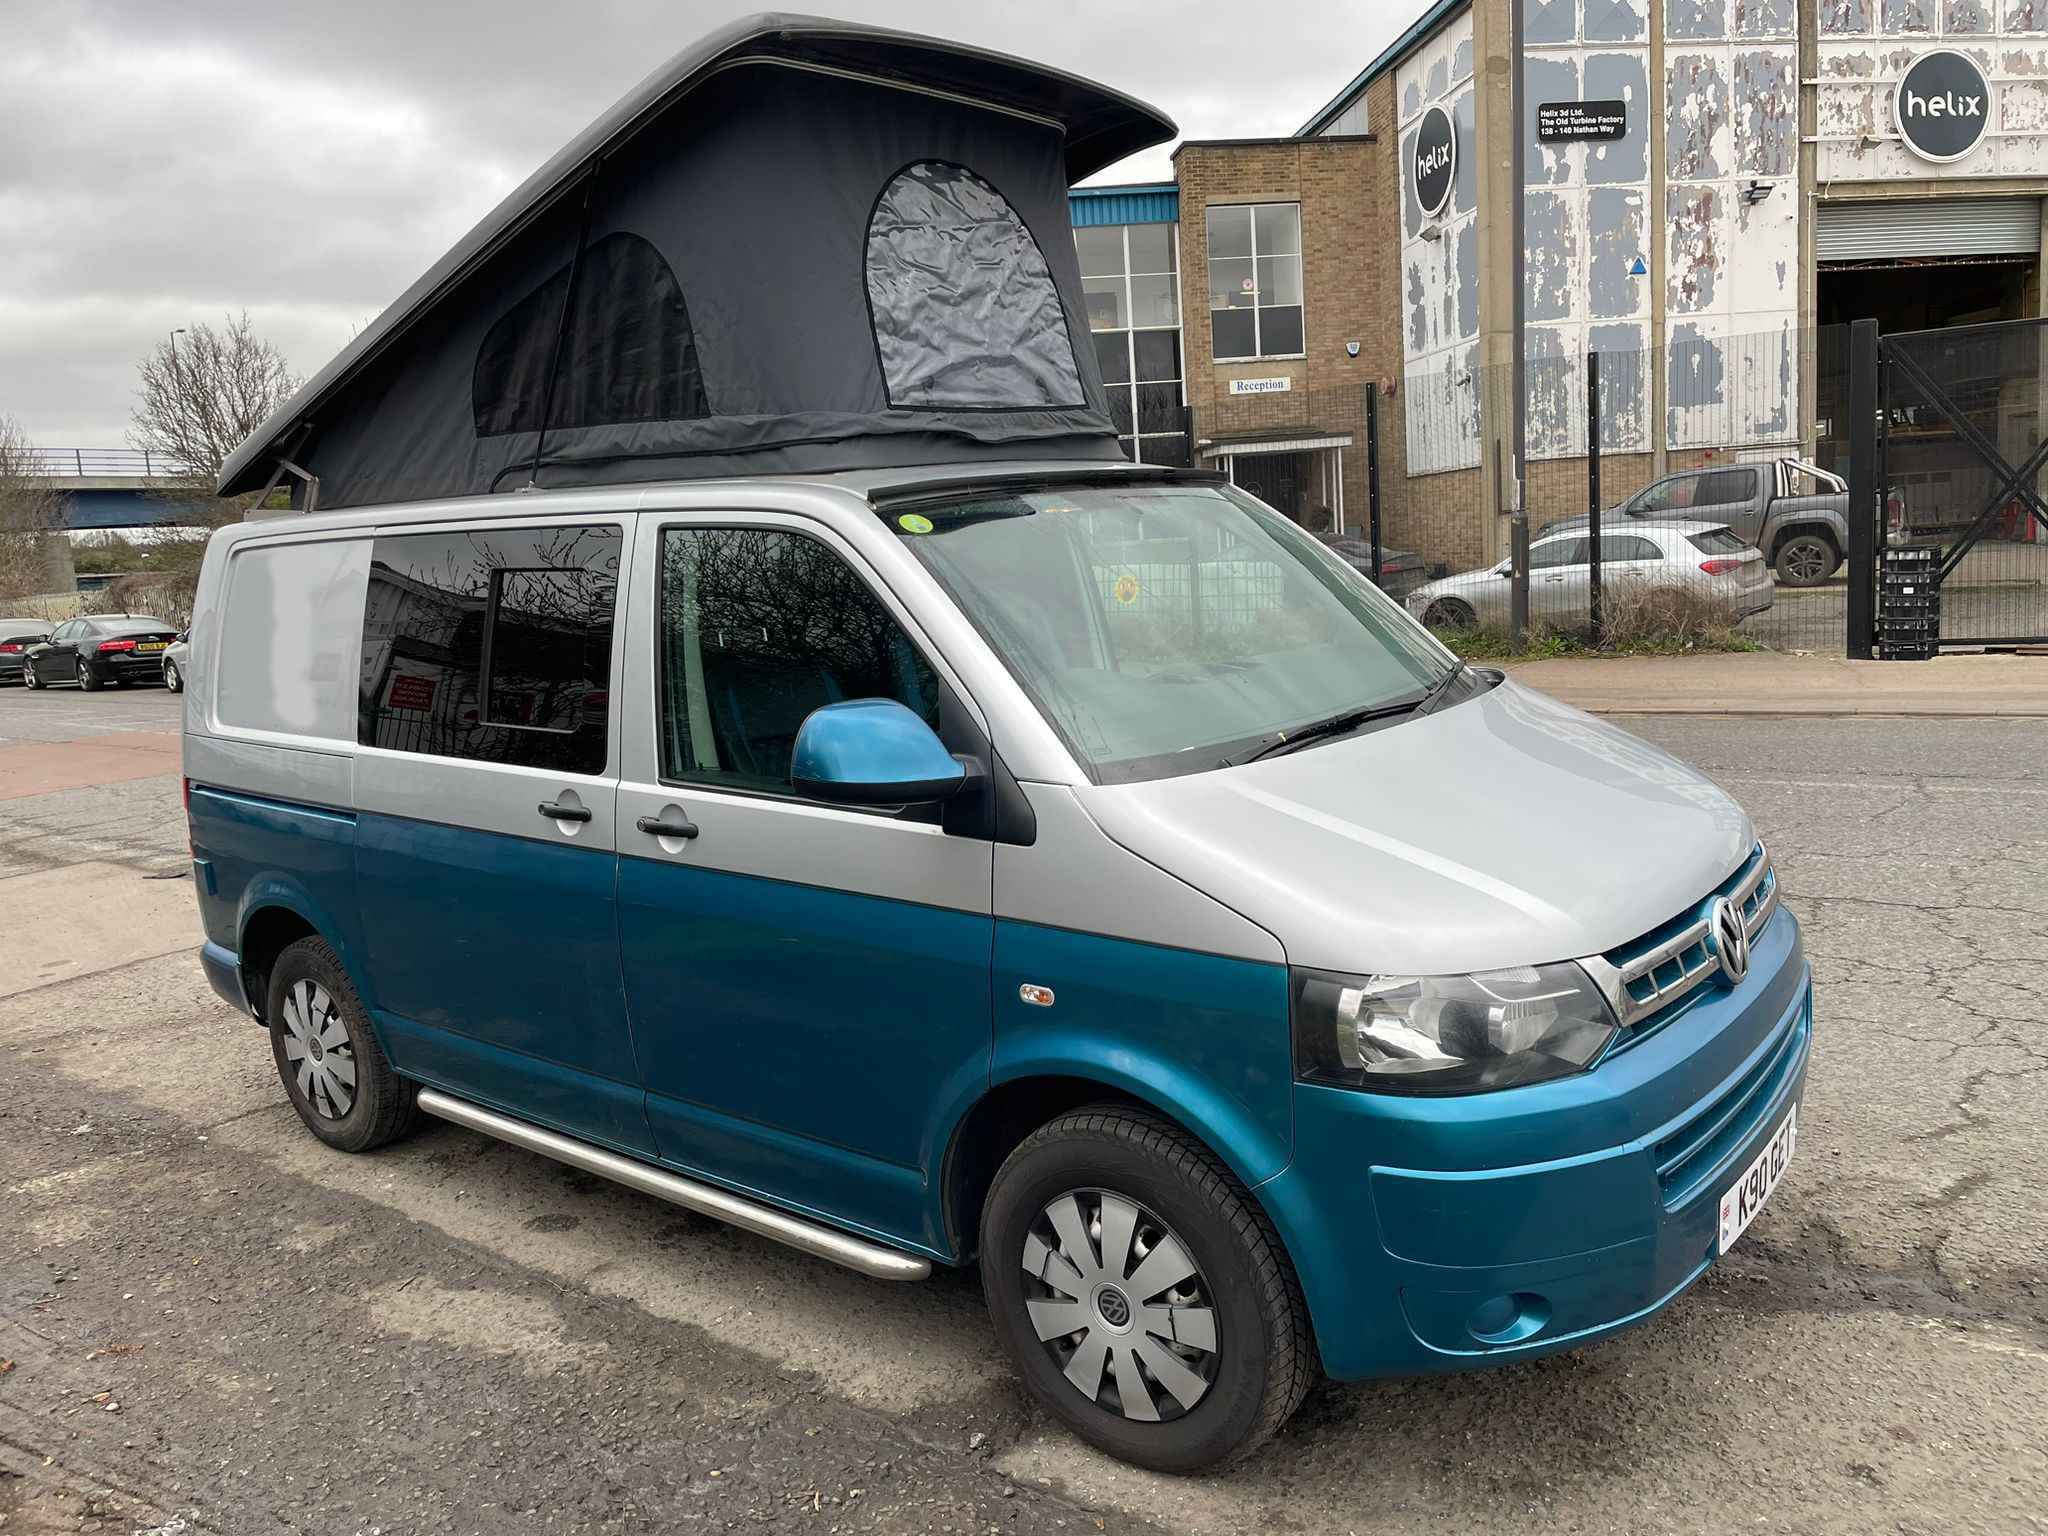 A VW T5 Campervan called kingfisher and for hire in London, England